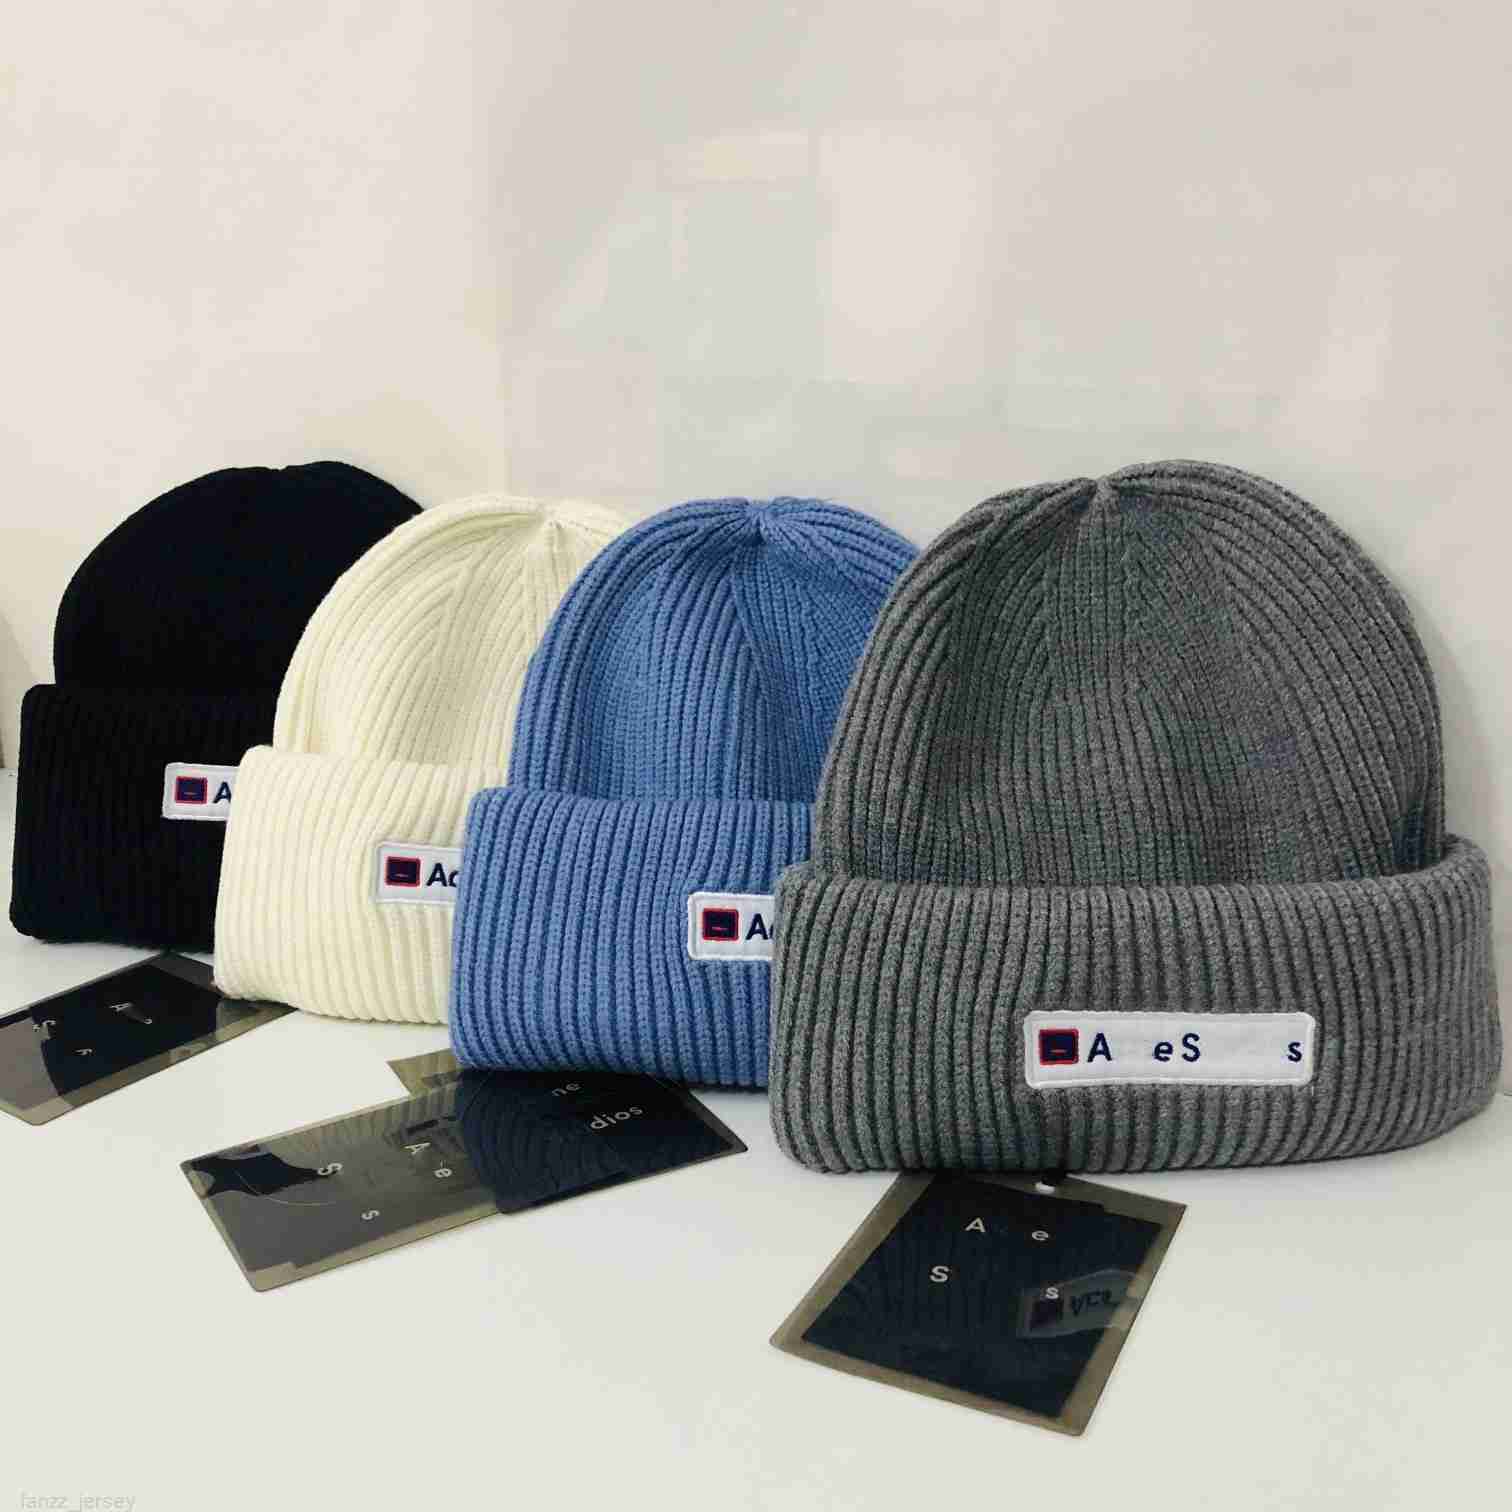 

beanie designer winter beanies knitted hat for men and women fashion skull caps letters street hats smiling face cap colors available 230gfor man woman, 1-white